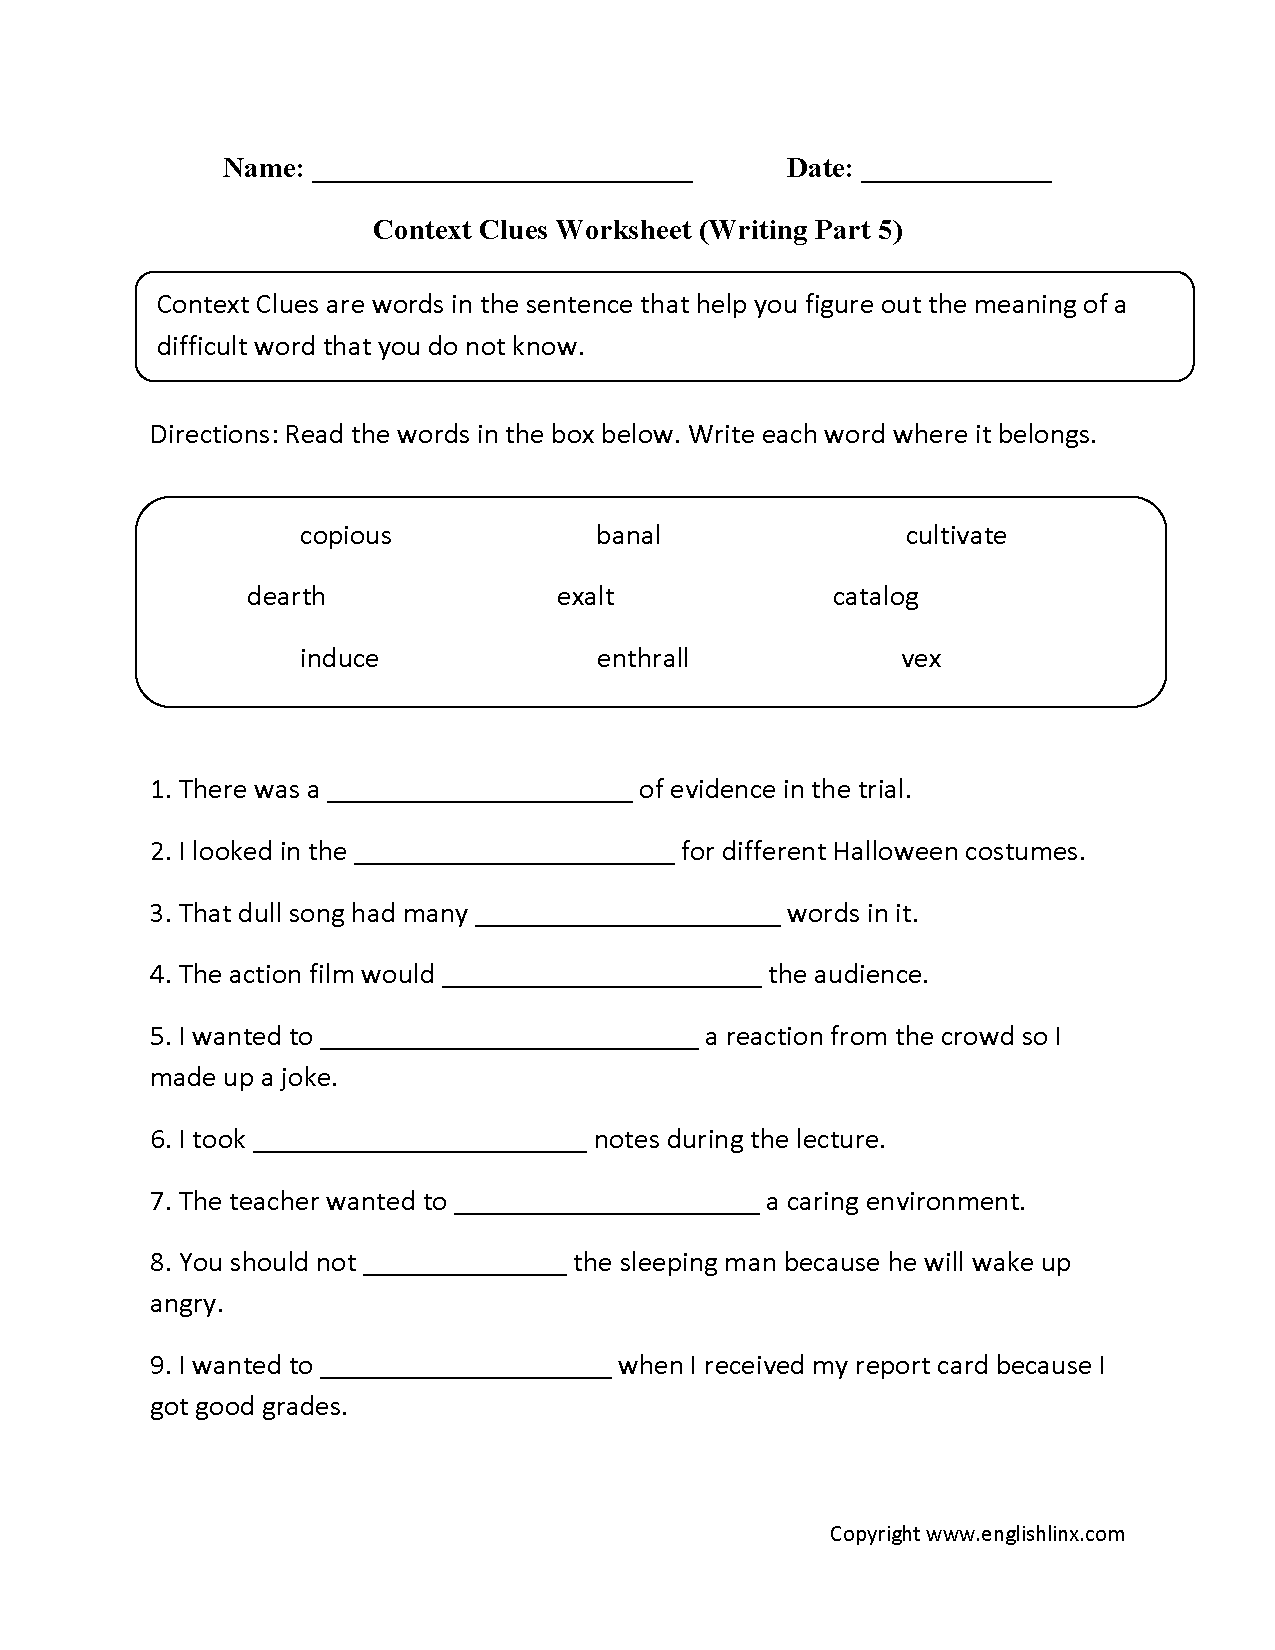 Context Clues Worksheets Writing Part 5 Advanced